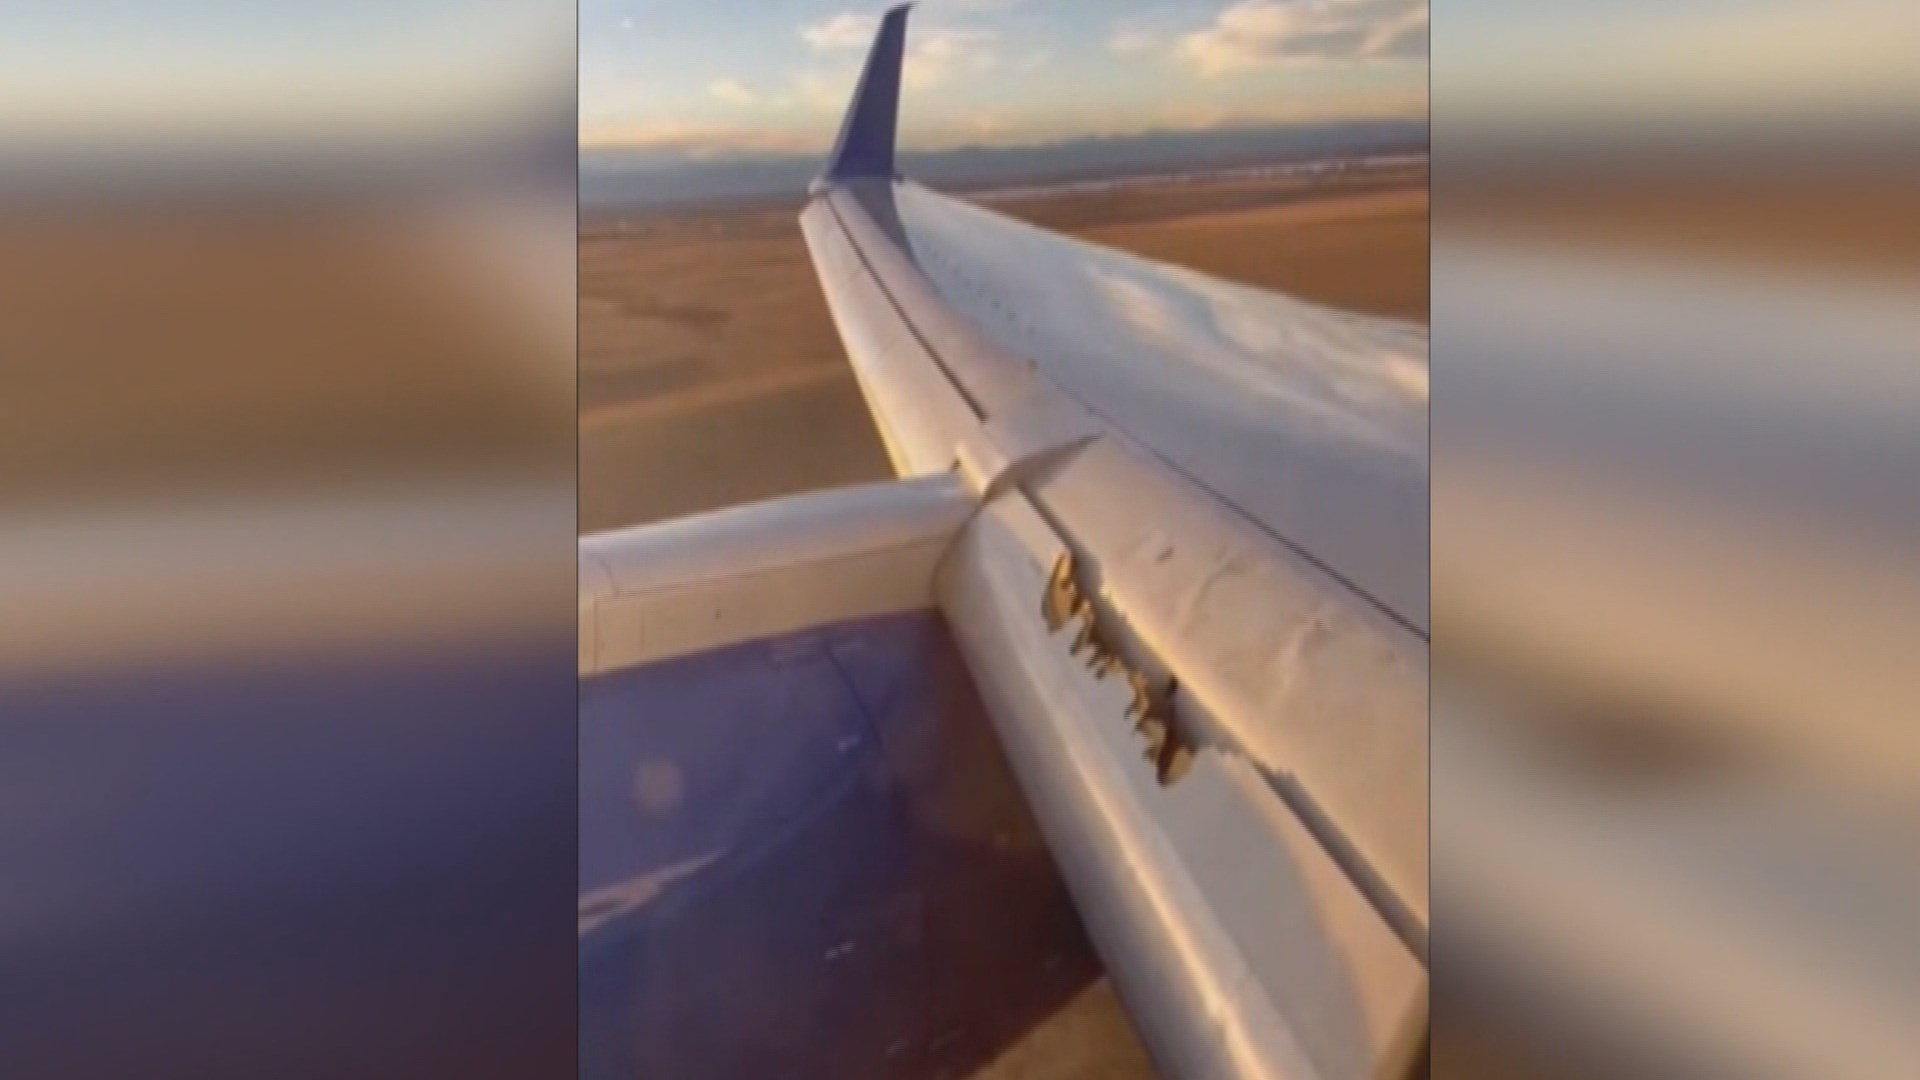 United flight from San Francisco to Boston diverted due to damage to one of  its wings